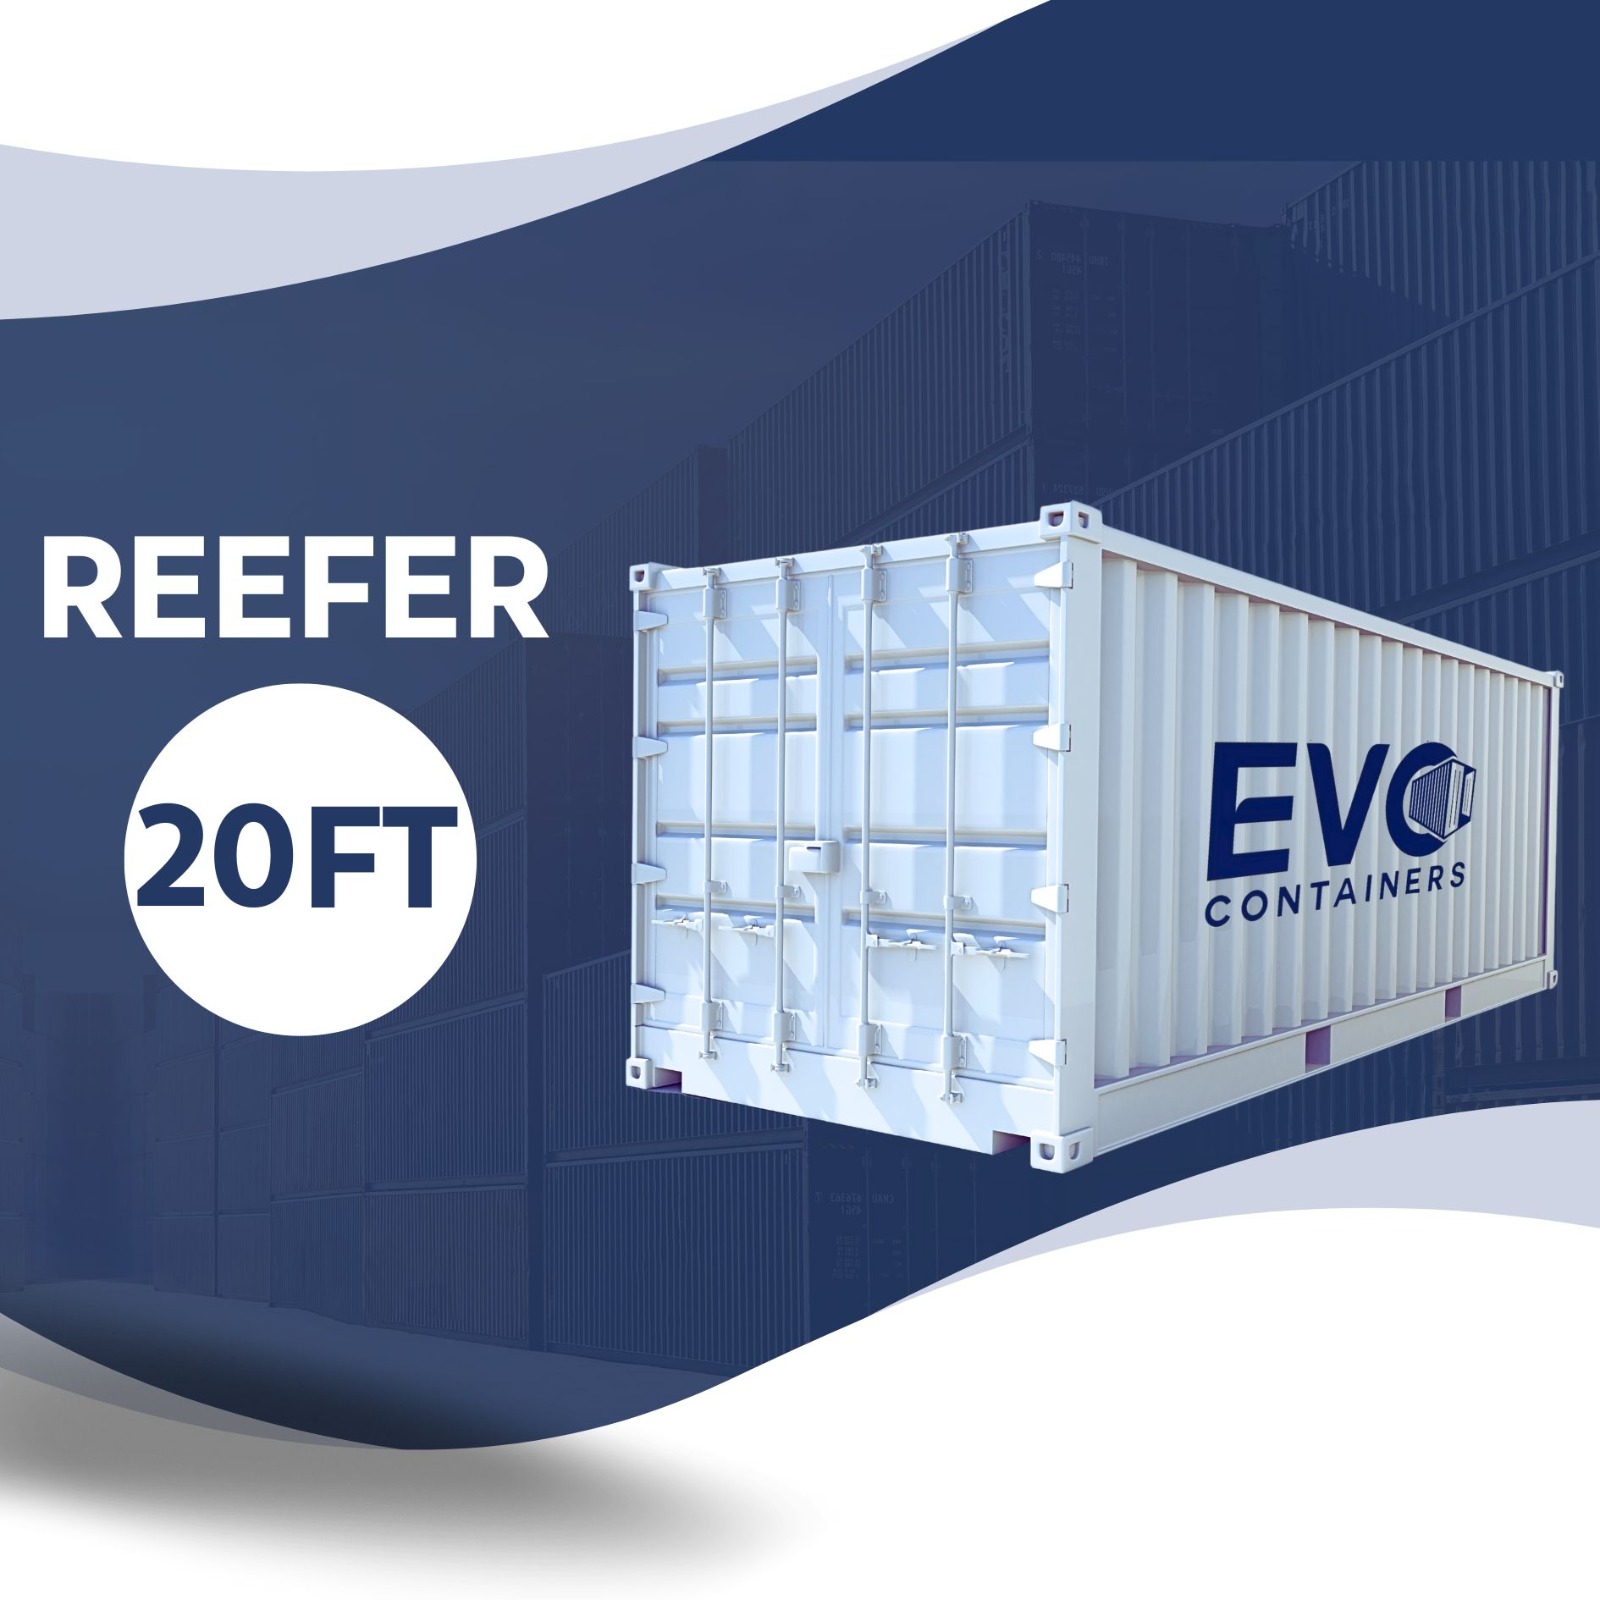 CONTAINER REFFER 20' ft